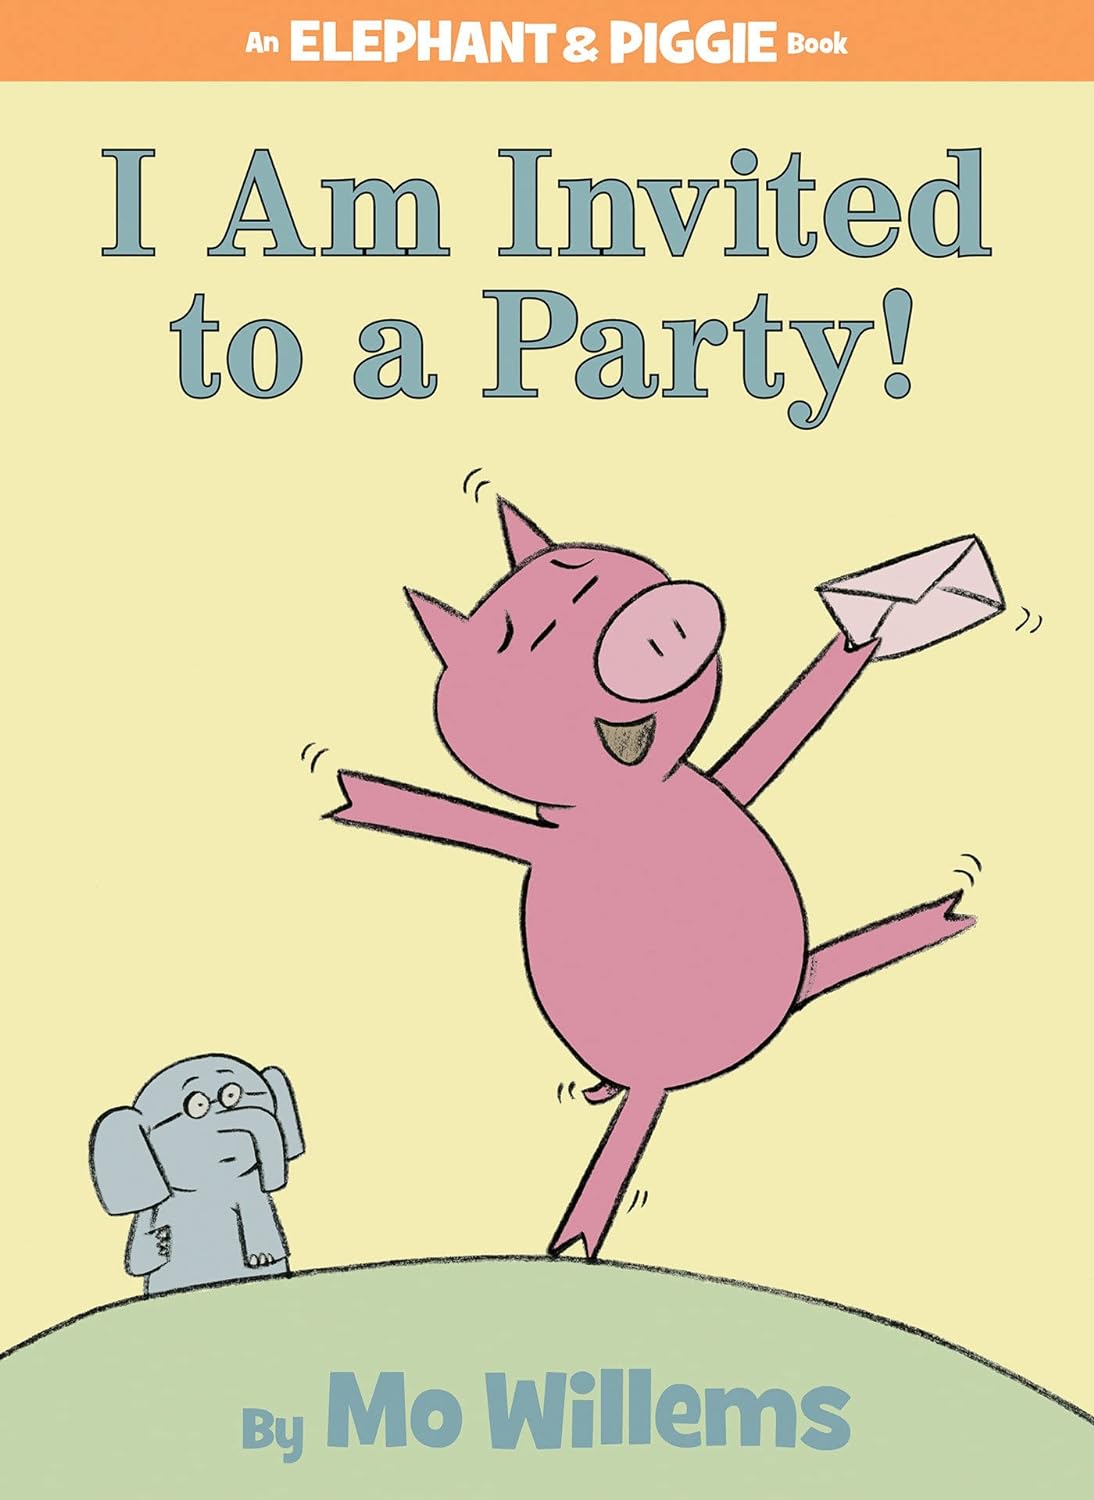 A picture of the cover for Mo Willems' book "I Am Invited to a Party!" shows Piggie excited to have an invitation and Gerald the Elephant looking sad behind her. The cover is yellow and green with blue writing.